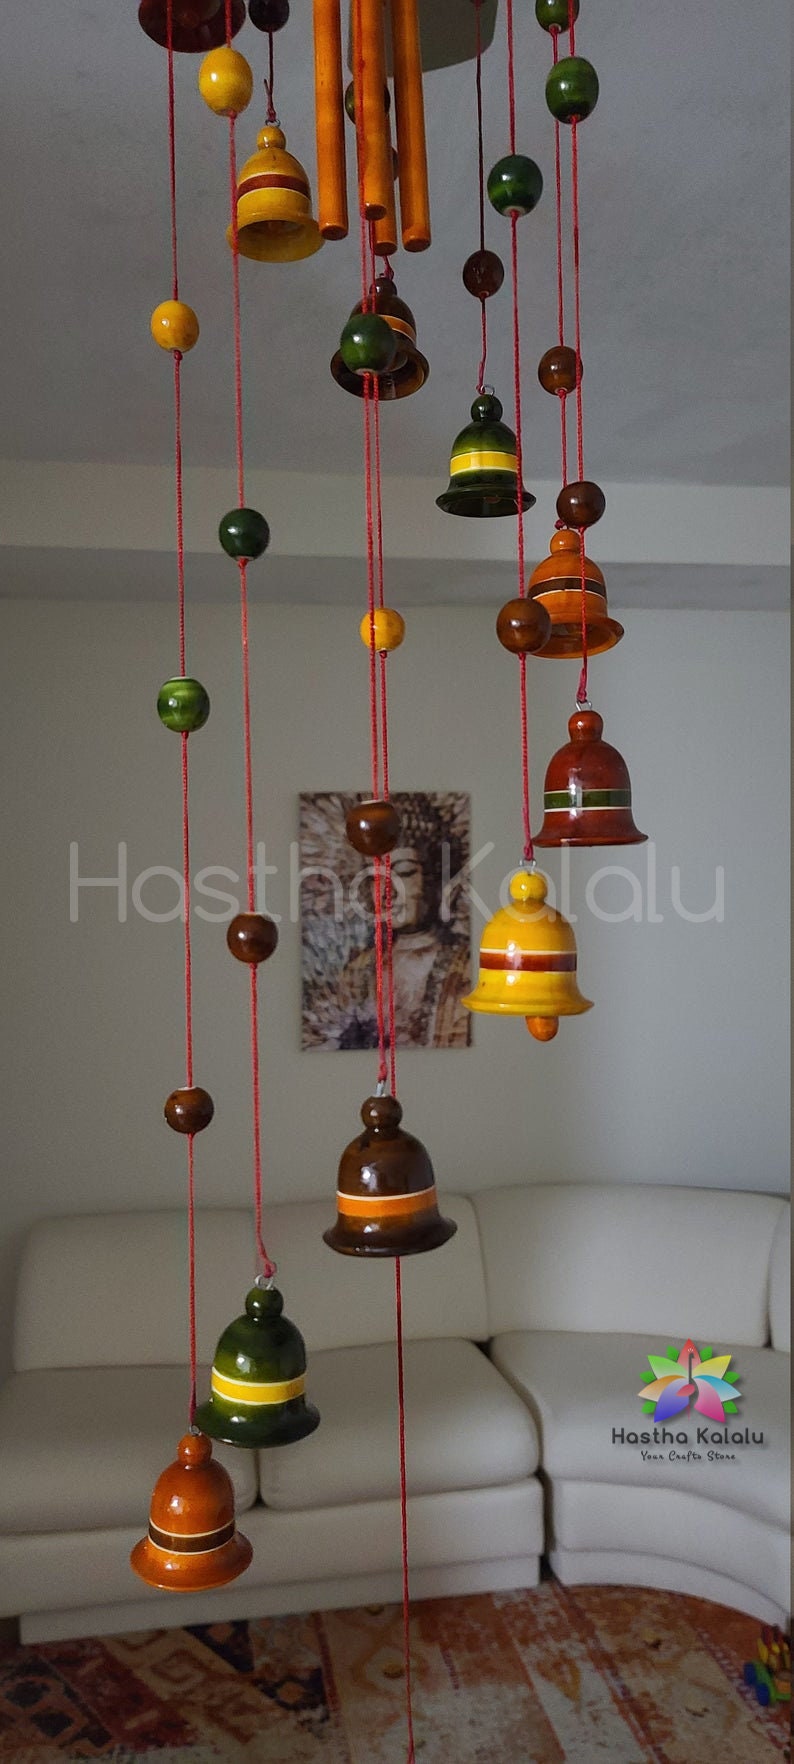 Artistic and calming sound making Wind Chime